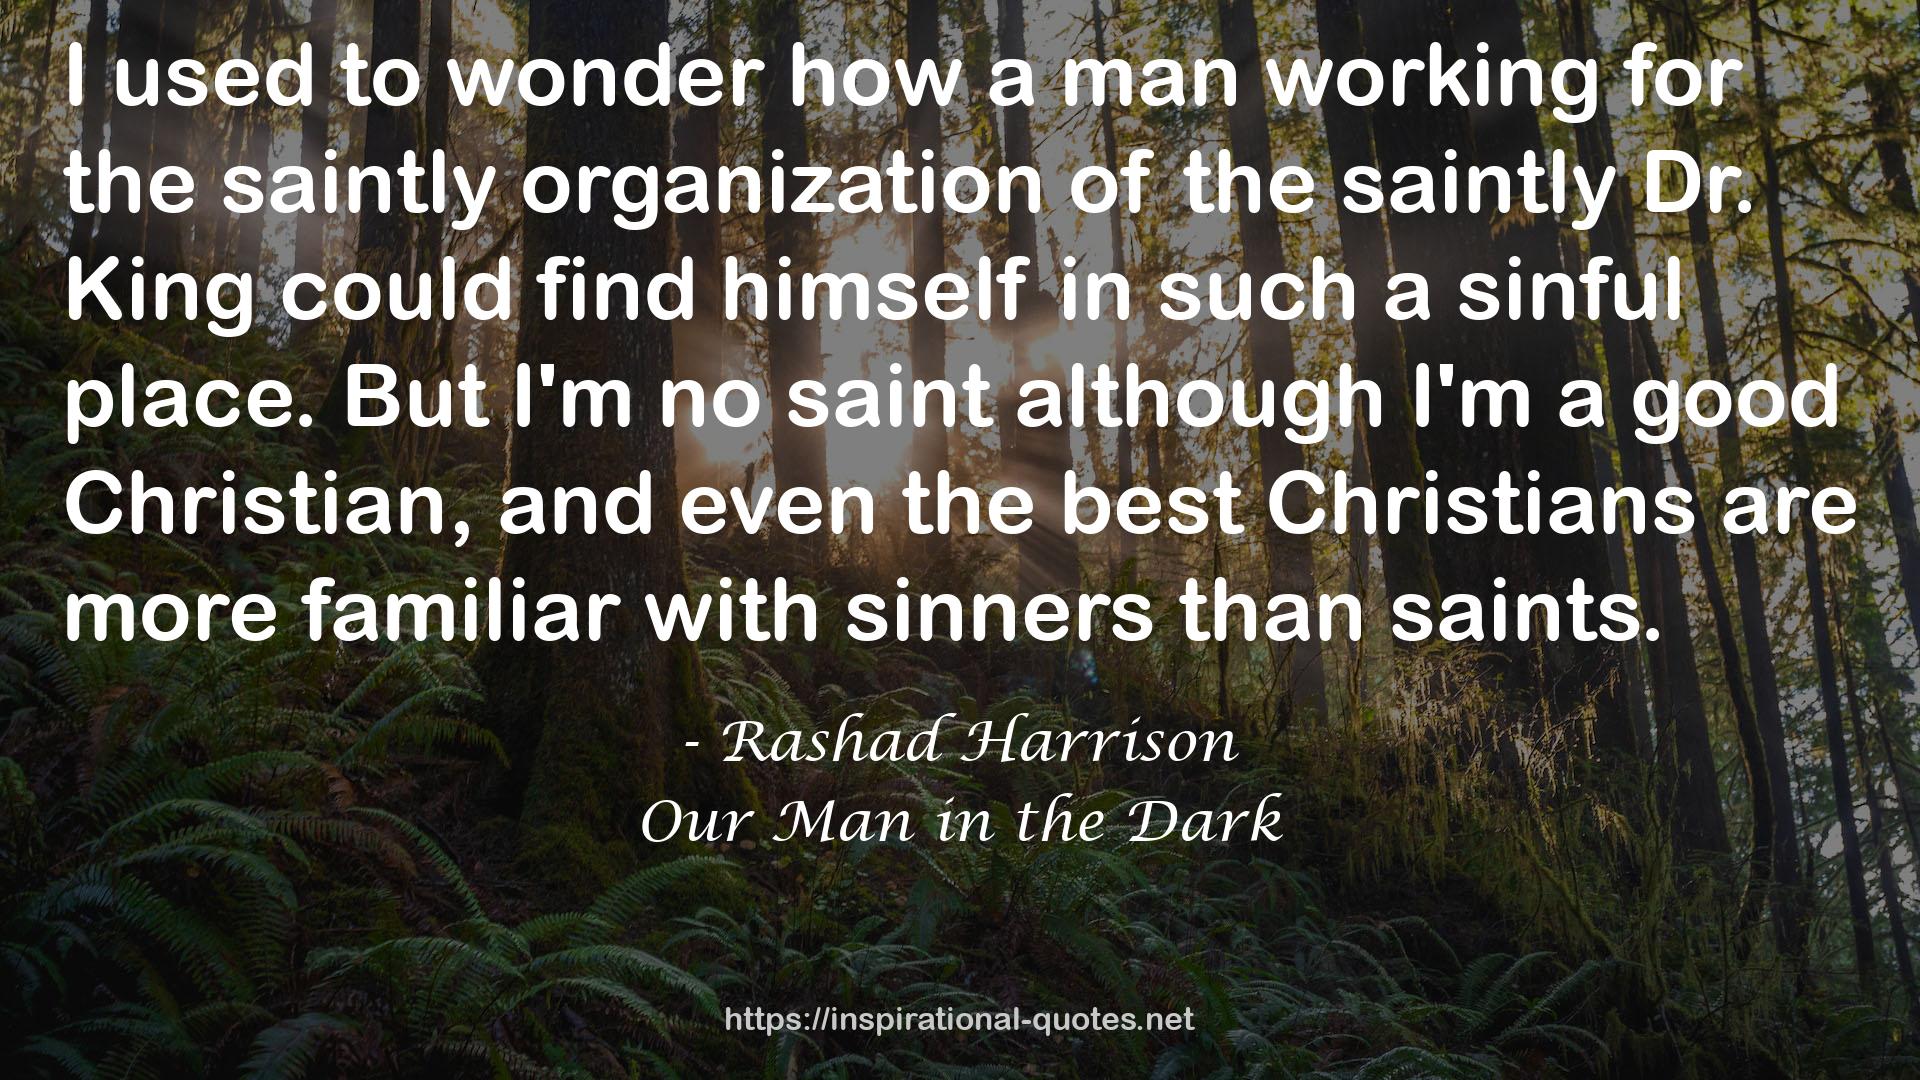 Our Man in the Dark QUOTES